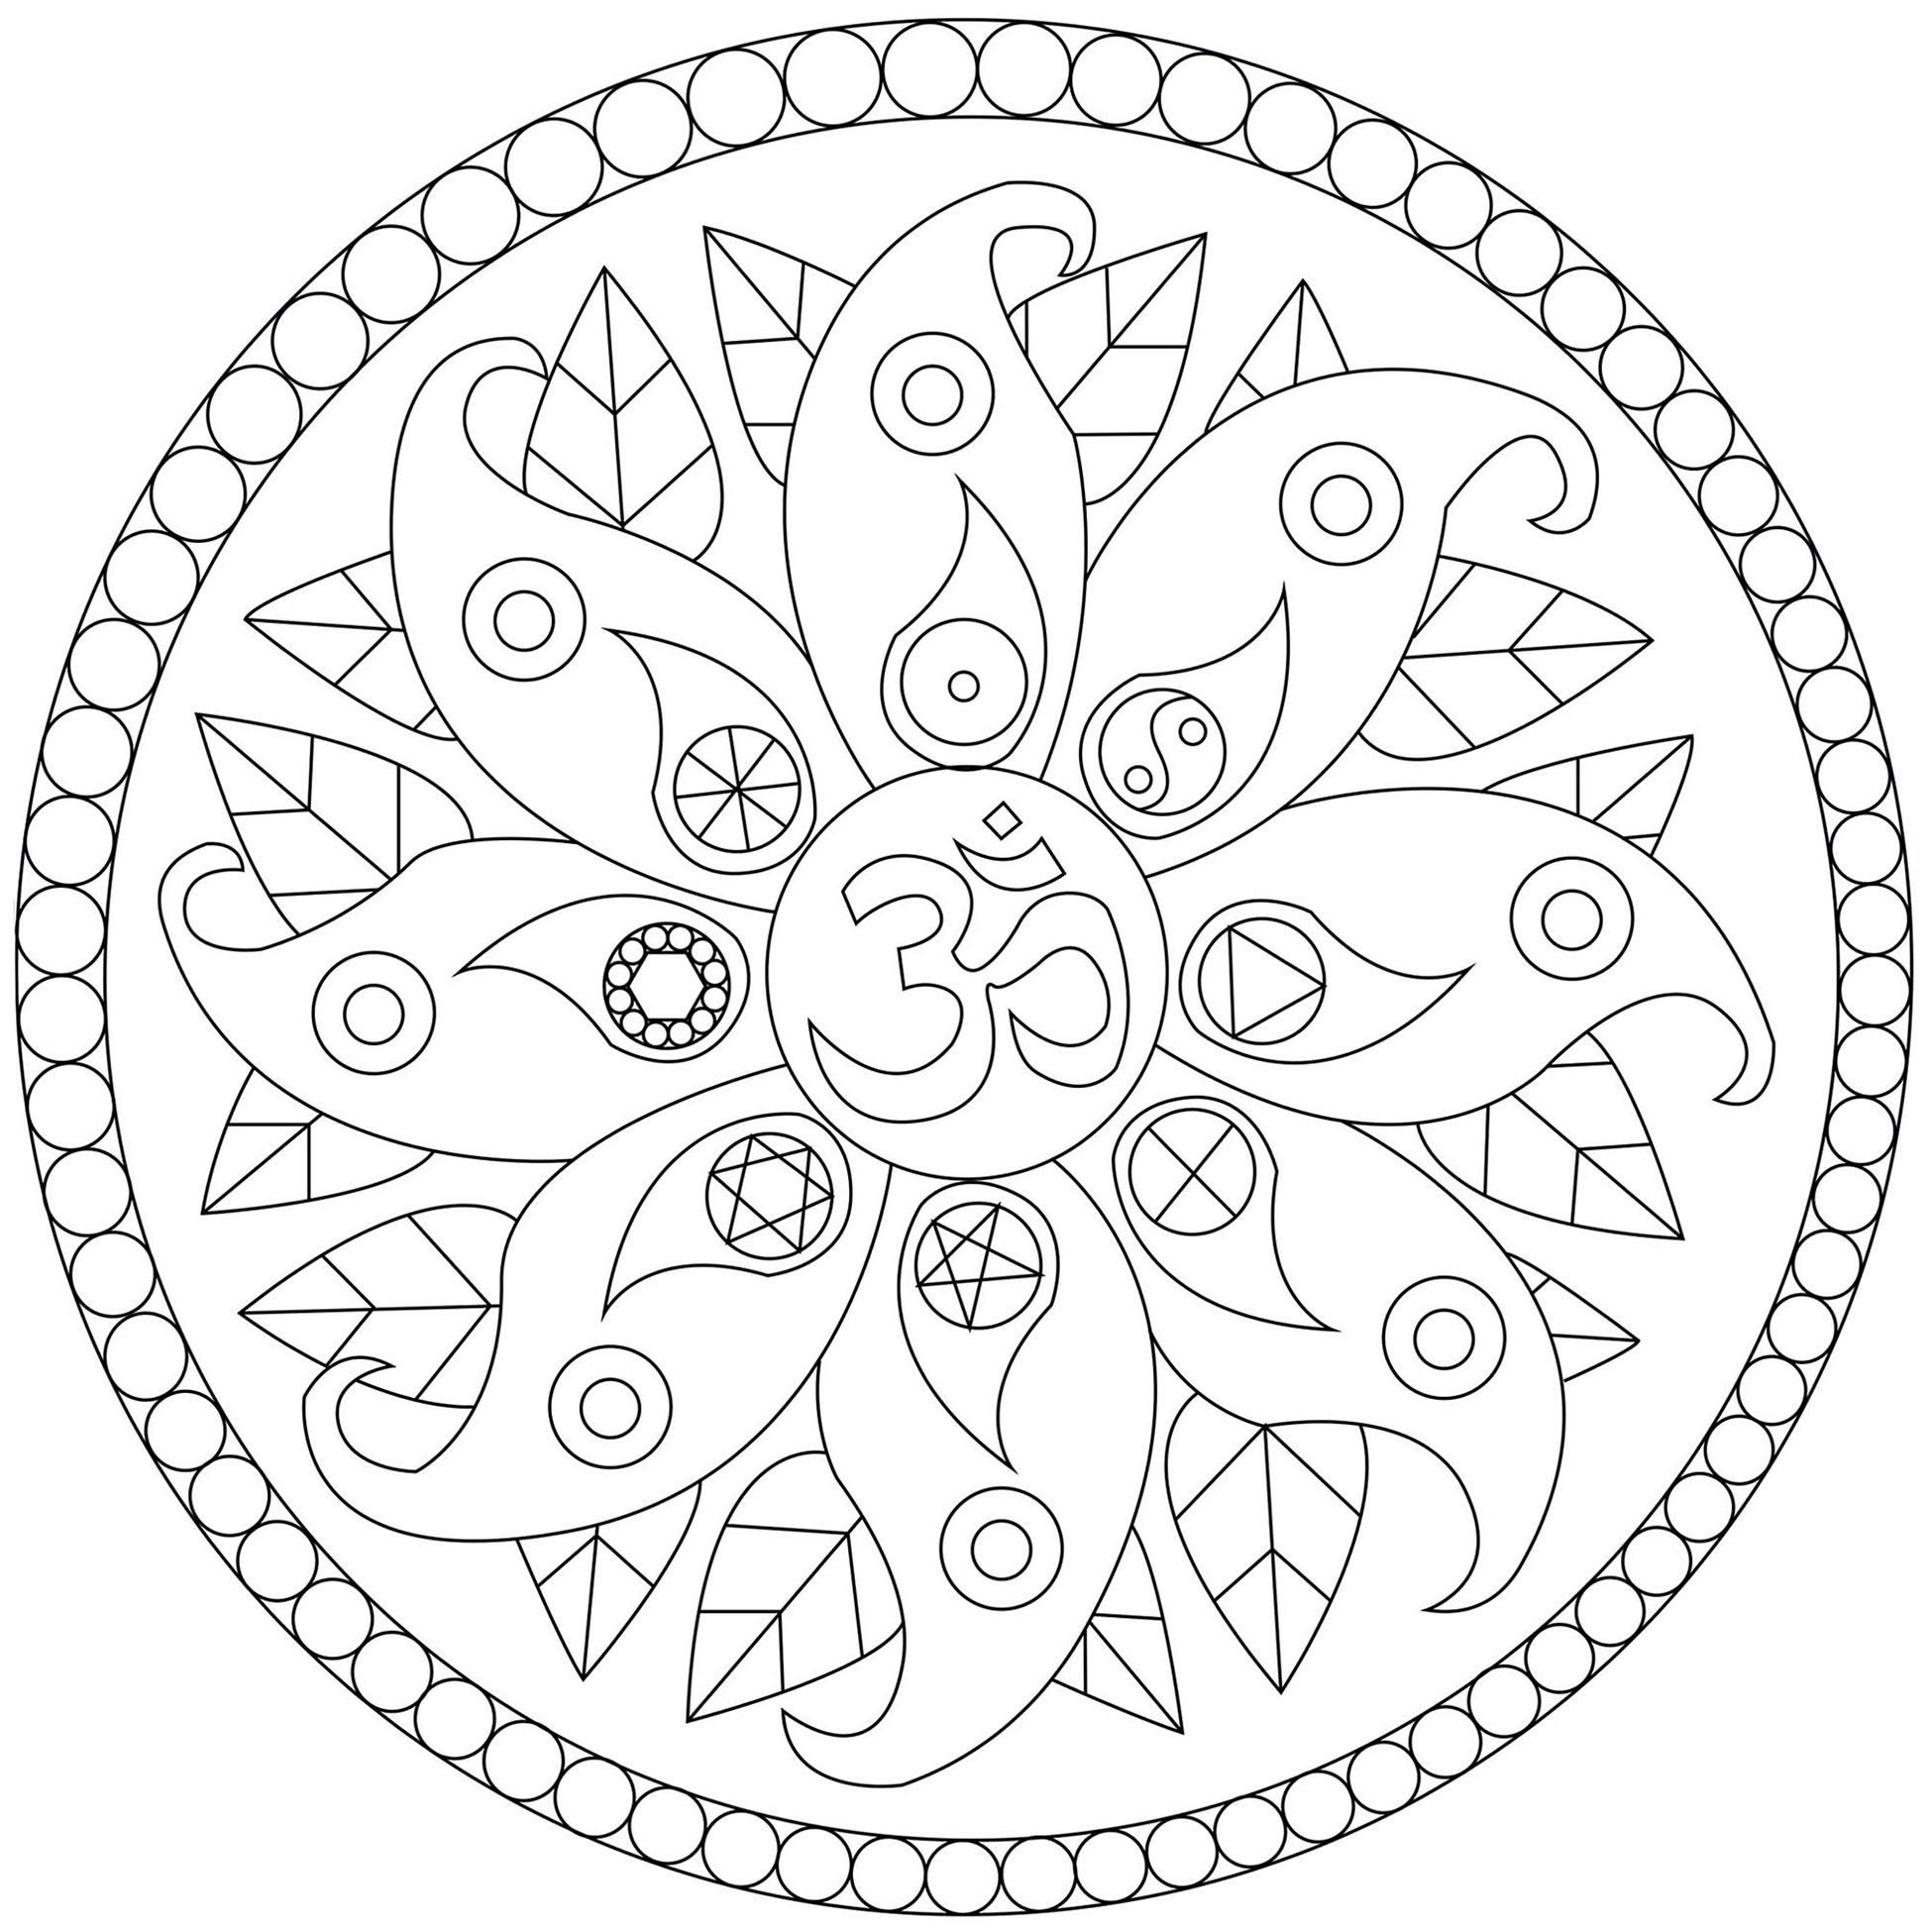 Simple Mandala with vegetal elements and various symbols : Om, Yin and Yang ... A coloring page very inspiring